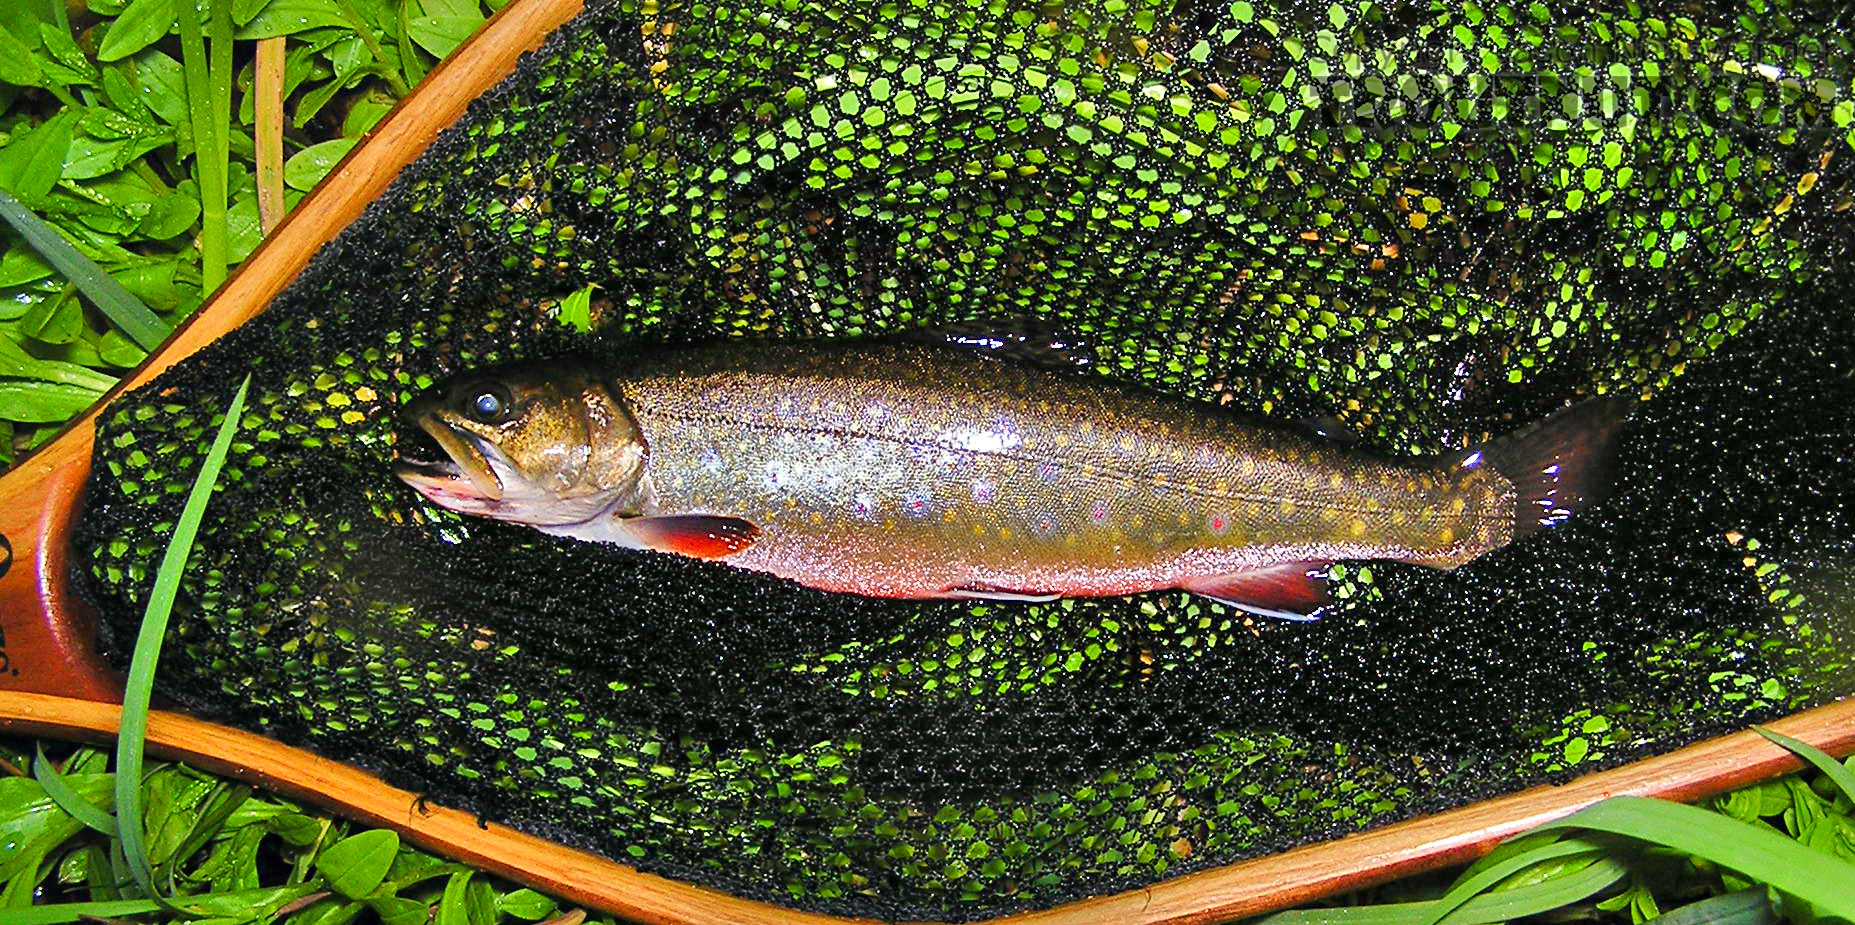 Here's a beautiful little brook trout in the 9 inch range. From the Namekagon River in Wisconsin.